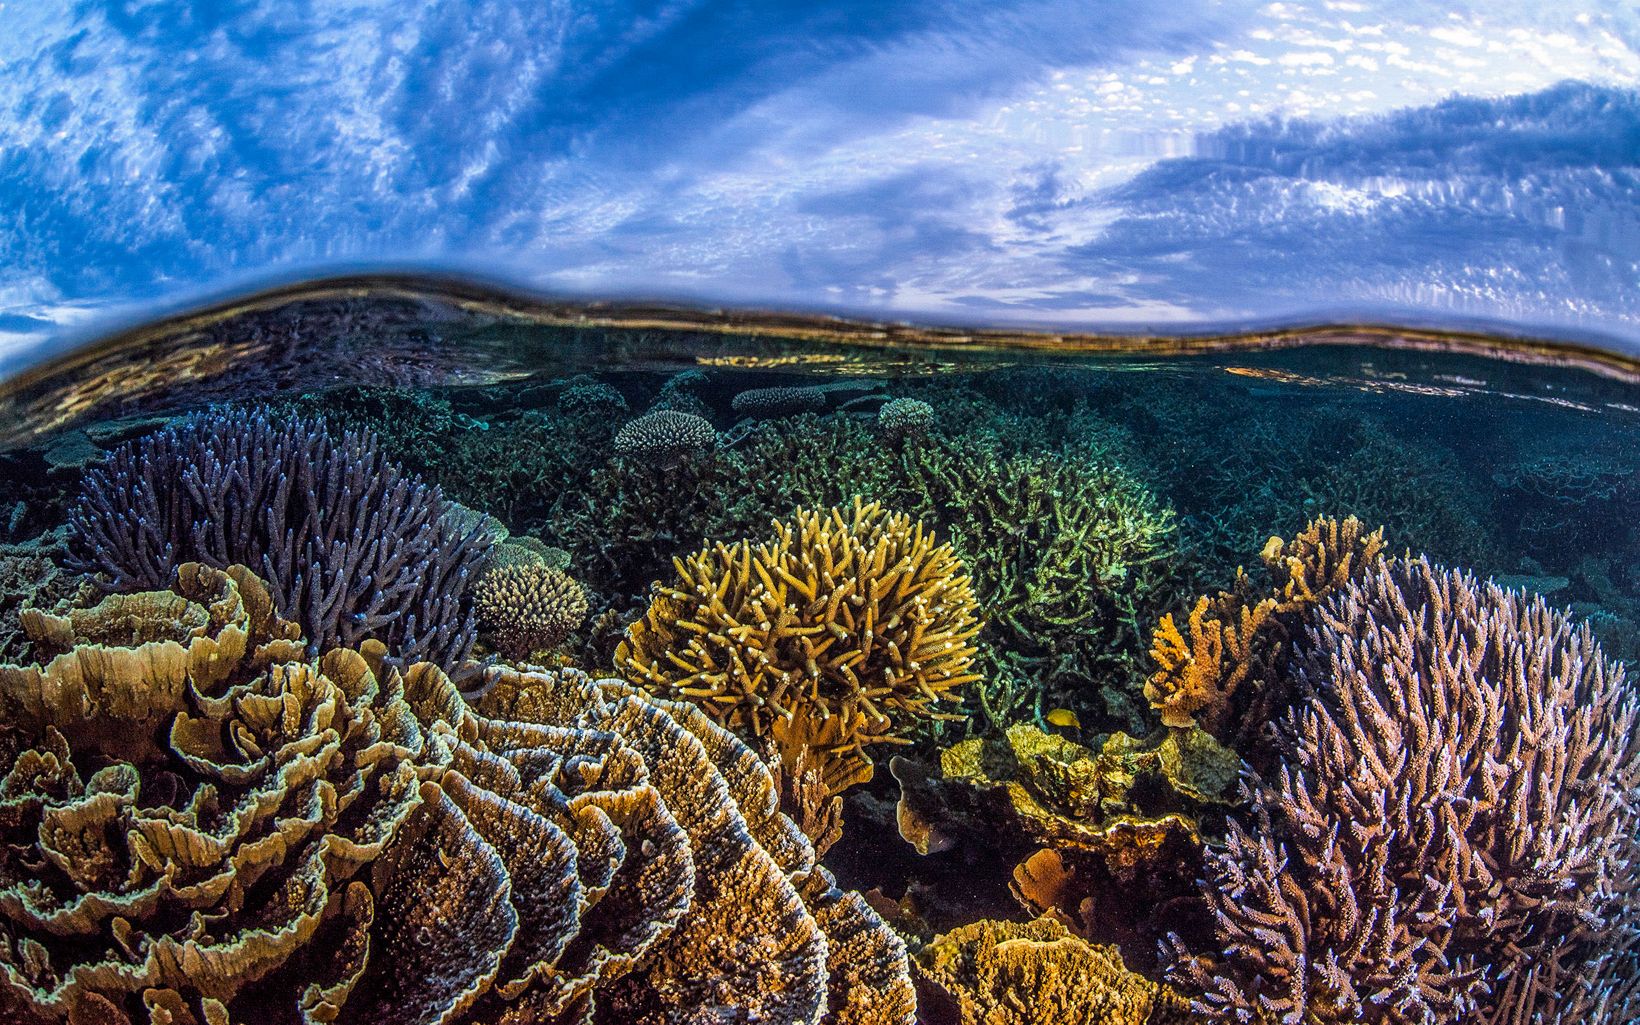 The dense and beautiful coral gardens of Coral Bay, Western Australia.